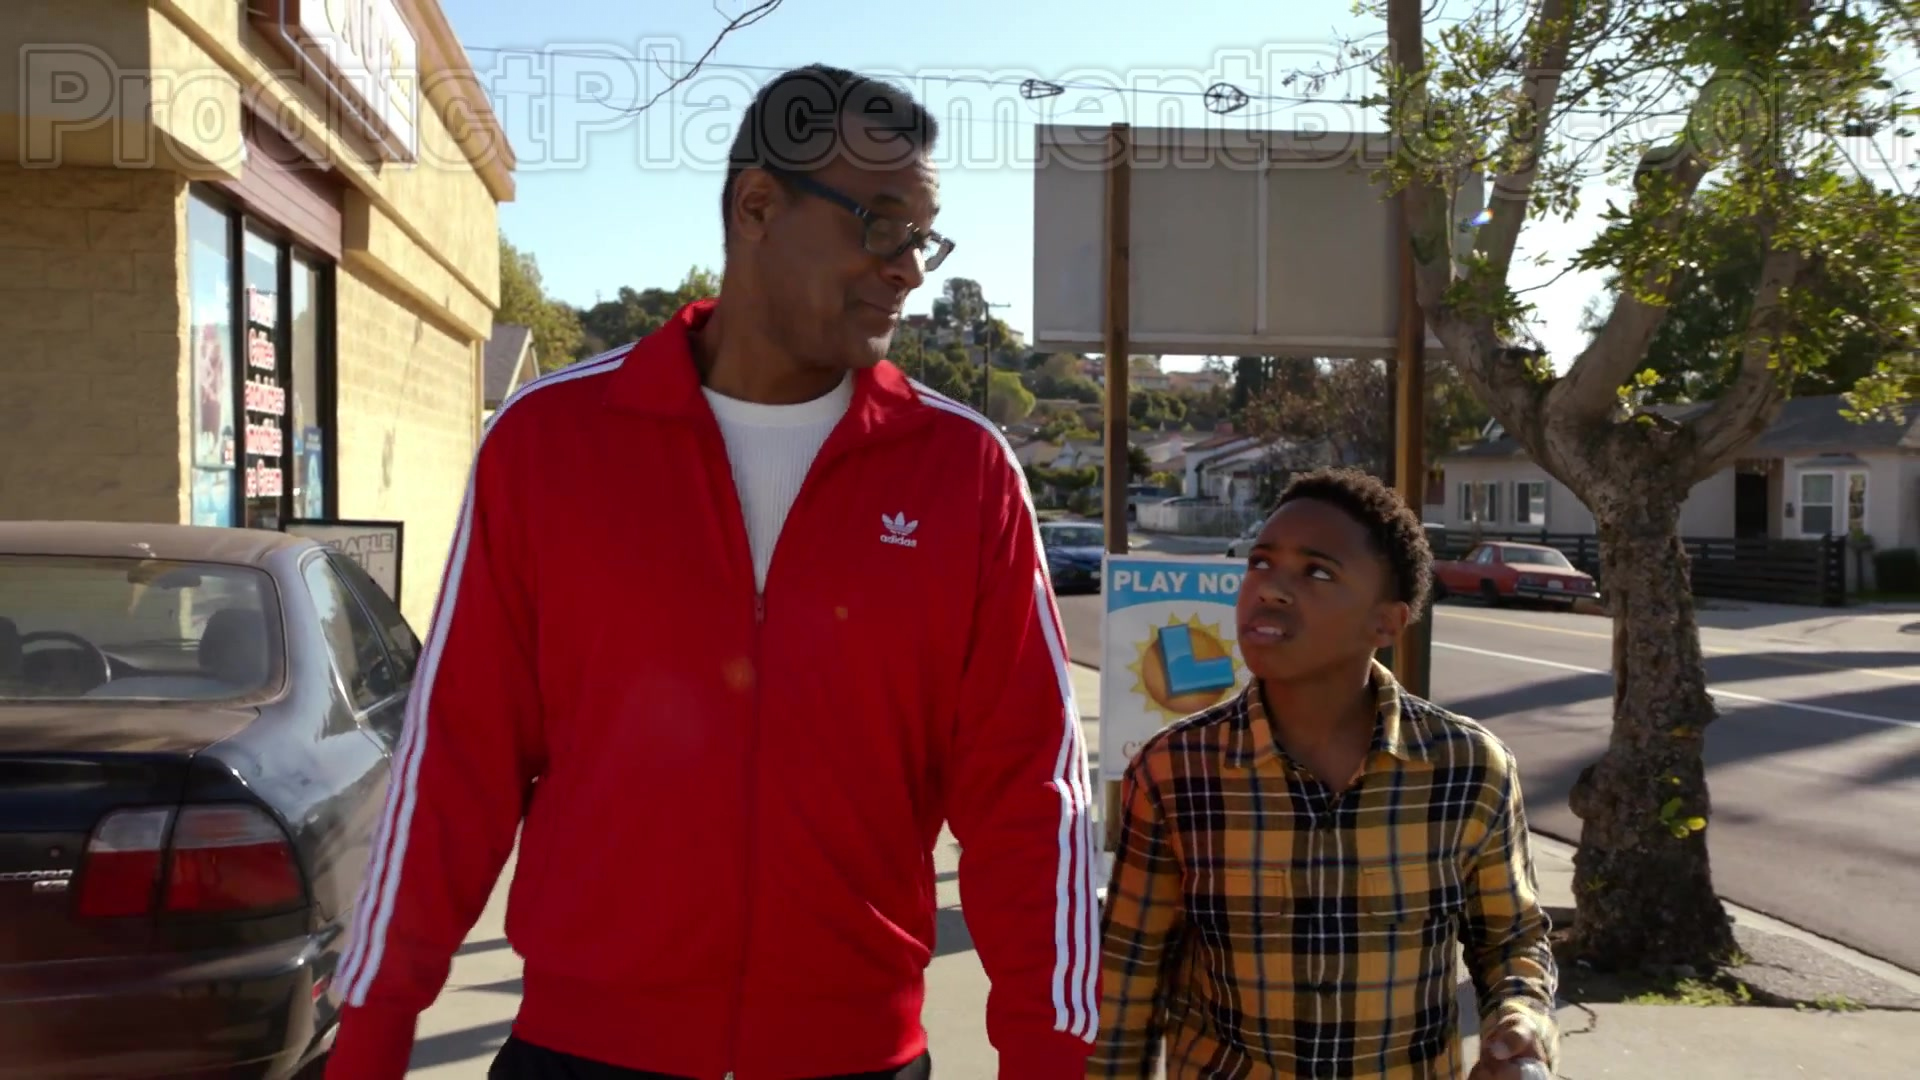 Adidas Men's Red Jacket In 9-1-1 S03E16 